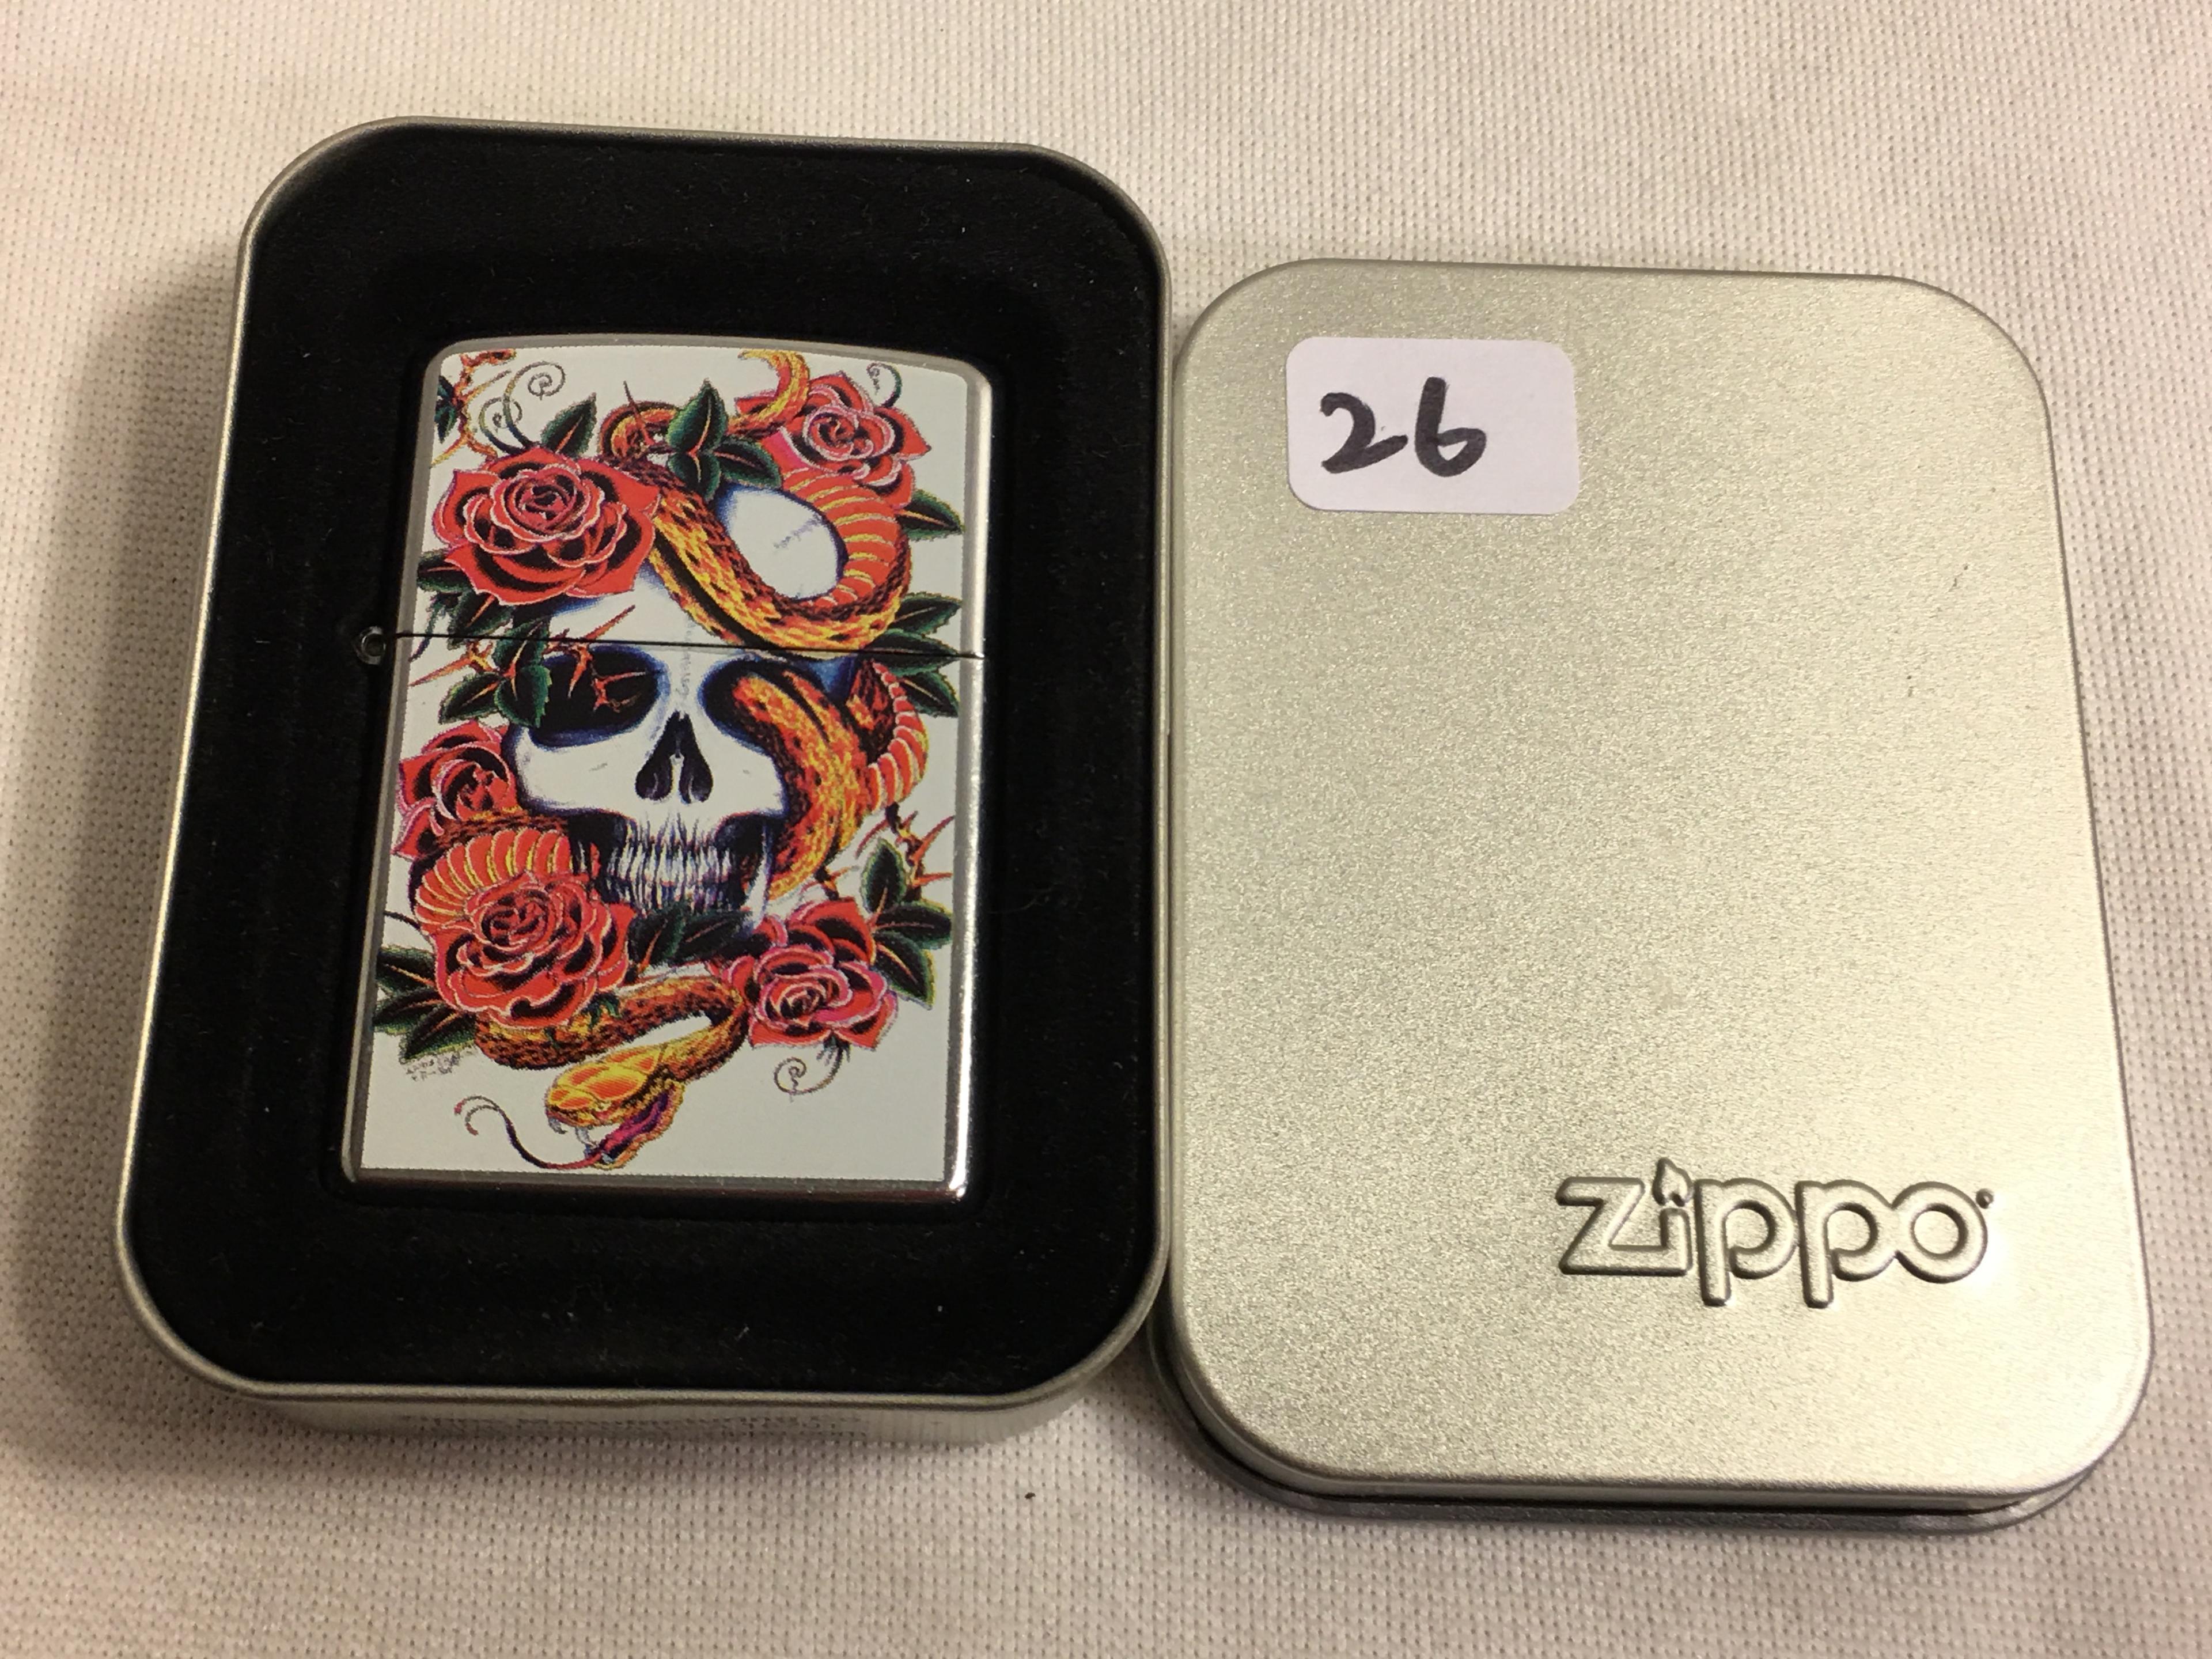 Collector  J Zippo 07 Bradford Made in USA The Traditions Pocket Lighter 2.1/4"tall